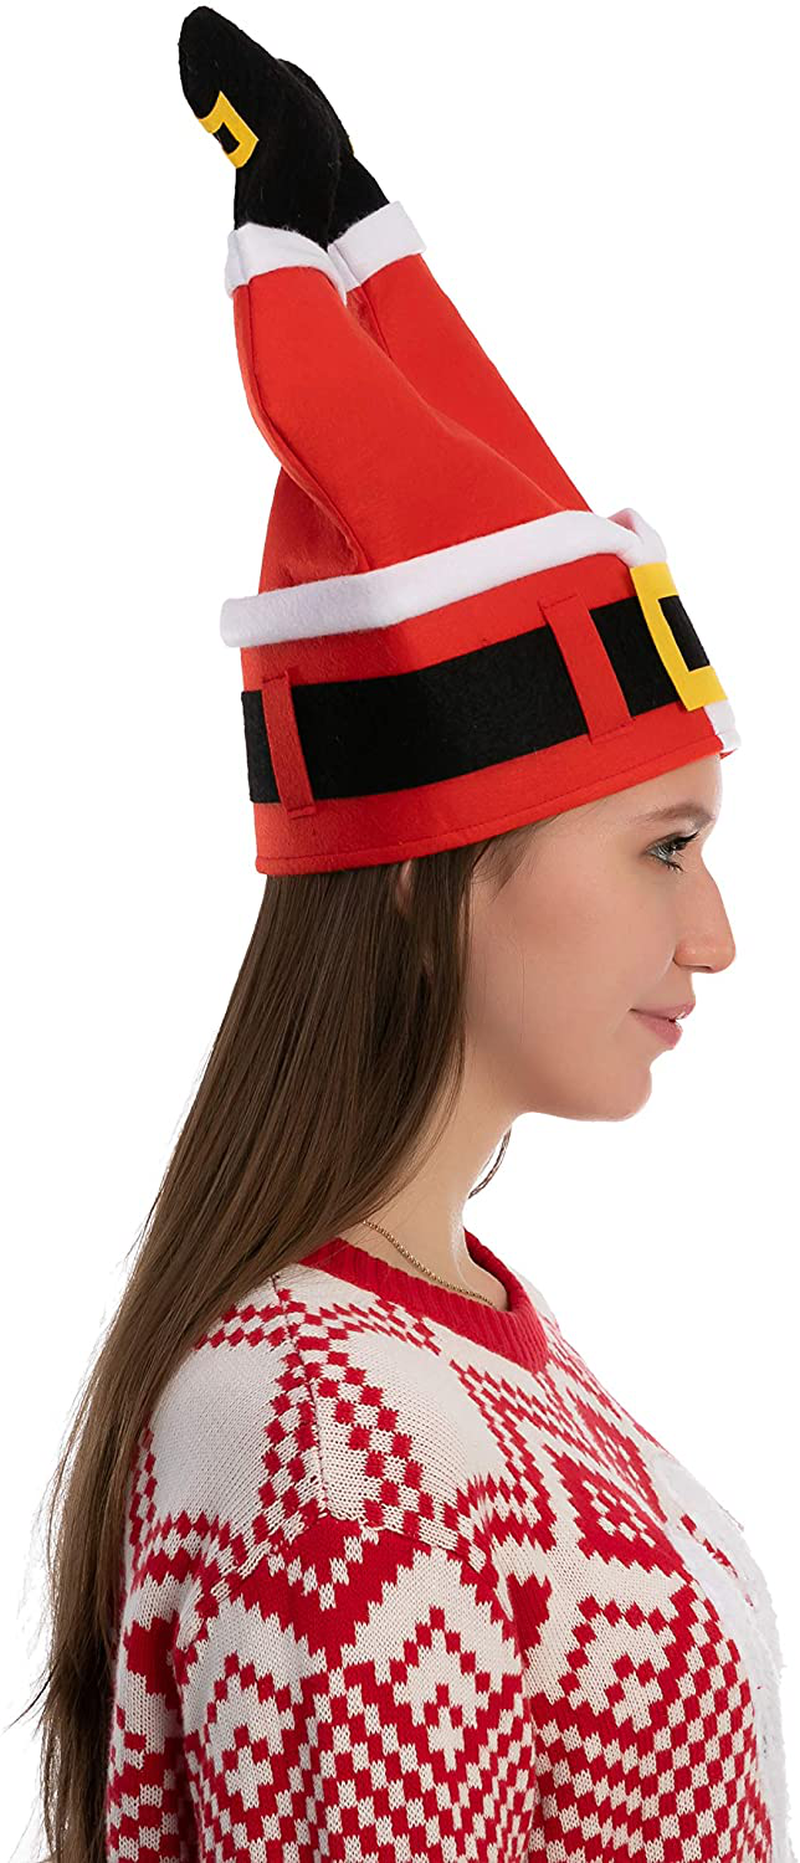 JOYIN 3 Packs Christmas Santa Pants Hats for Funny Hilarious and Festive Christmas Party Hat Dress Up Celebrations, Winter Party Favor, Christmas Decorations, Costume Accessories Red Home & Garden > Decor > Seasonal & Holiday Decorations& Garden > Decor > Seasonal & Holiday Decorations JOYIN   